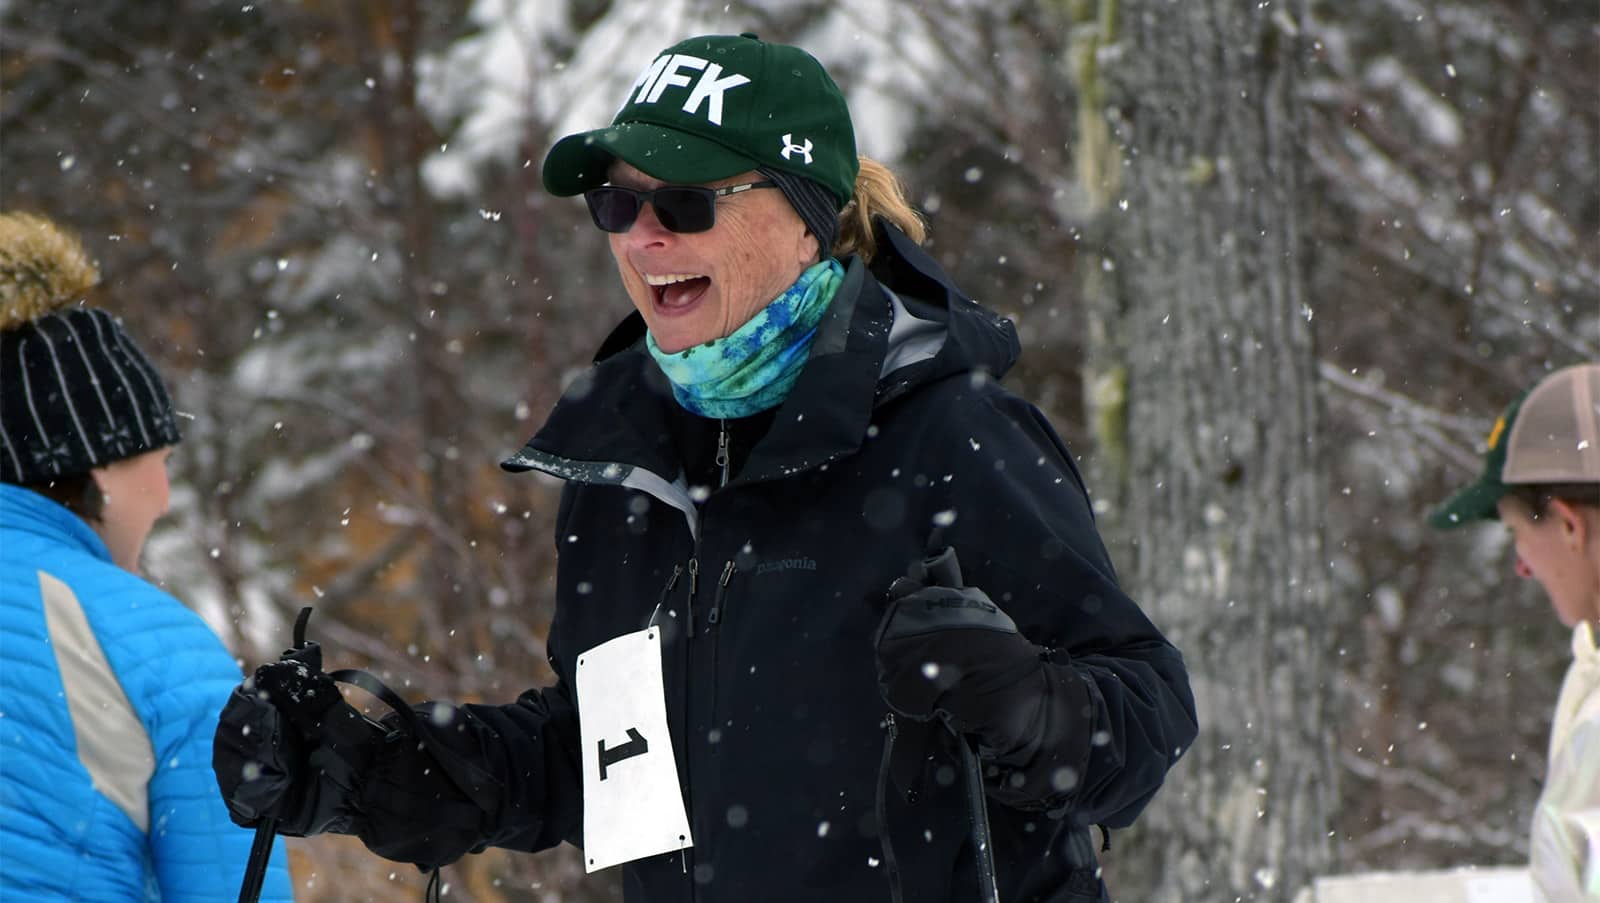 President Hedeen smiles as she participates in the ski-shoe-ski event